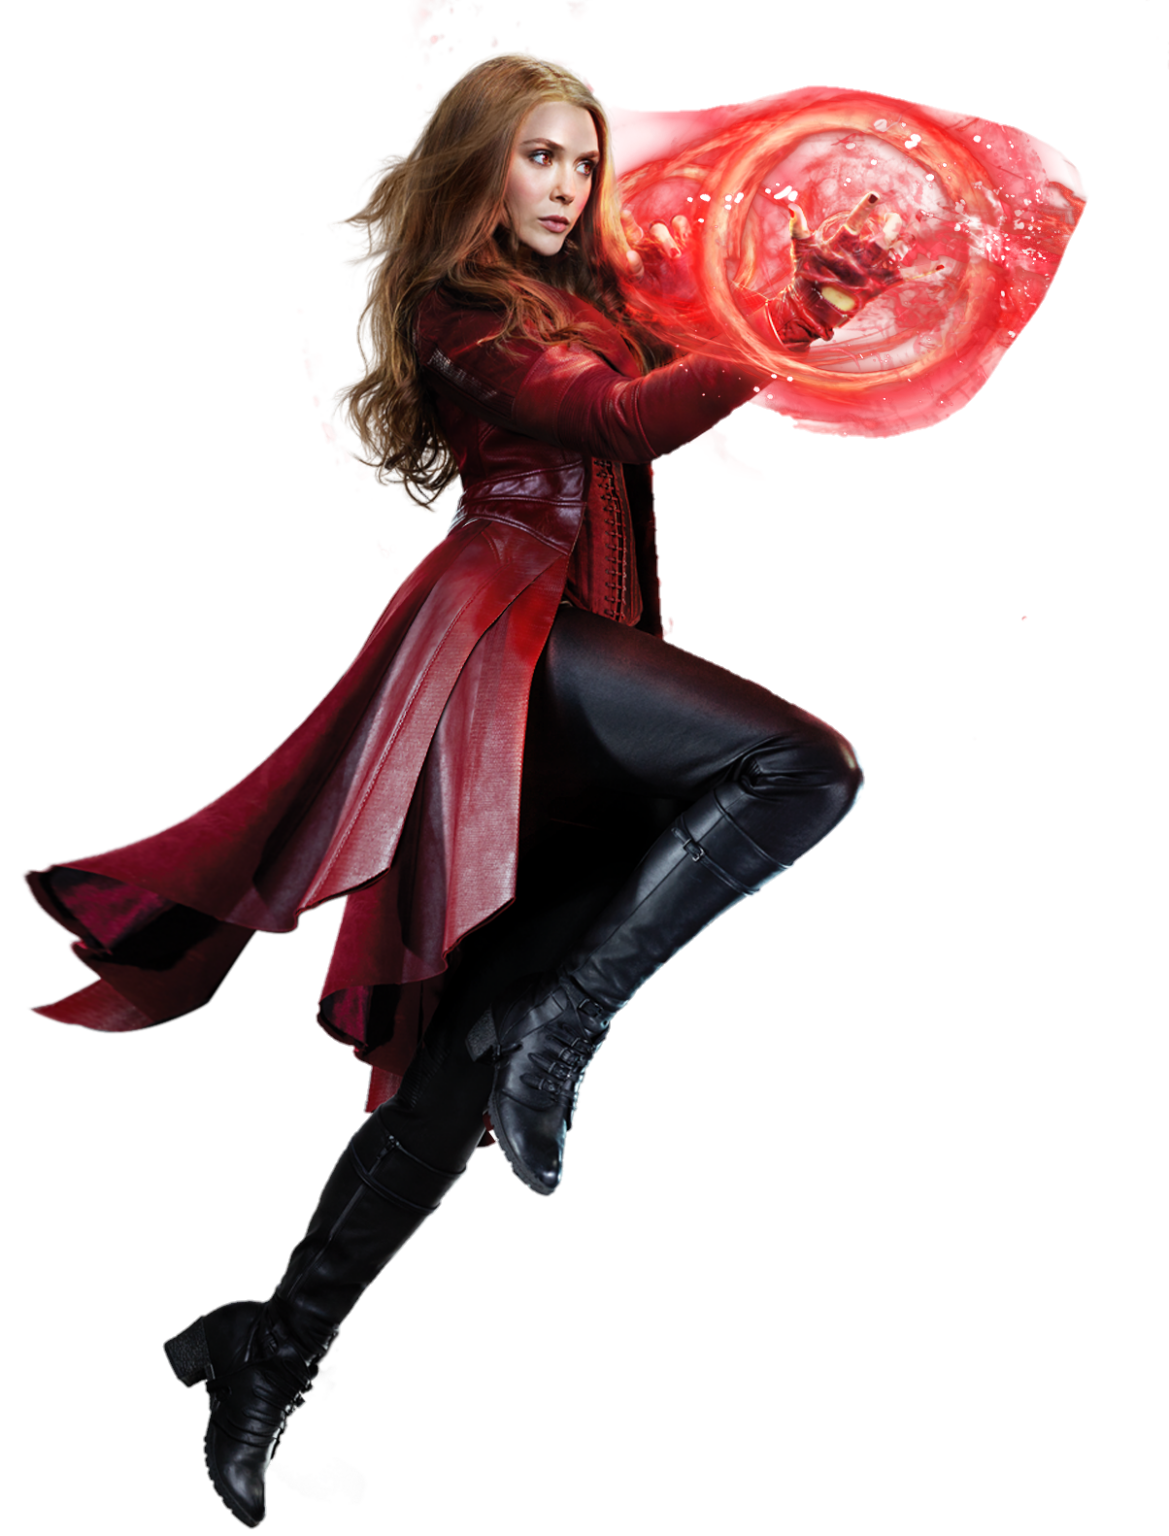 Wanda Maximoff PNG Transparent Images Free Download - Pngfre